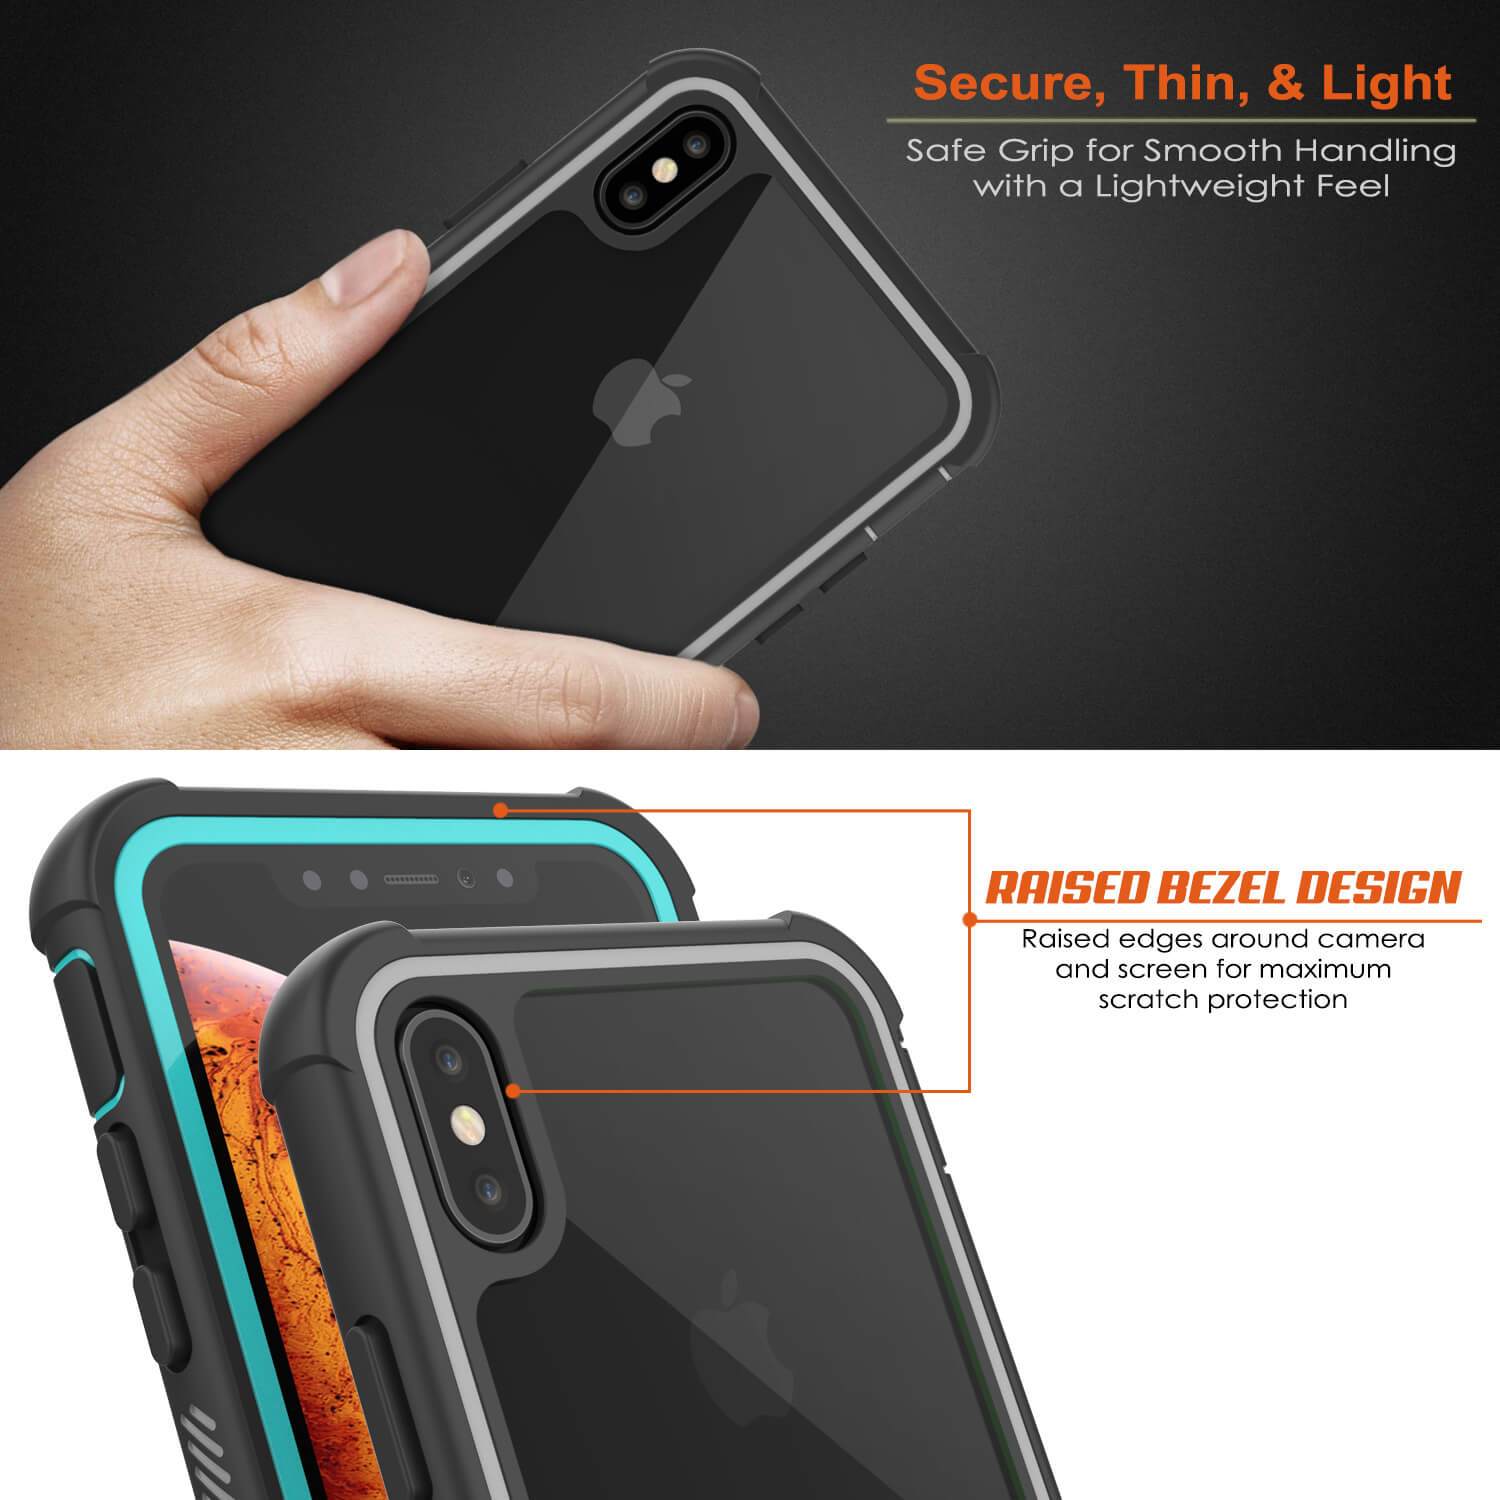 PunkCase iPhone XS Max Case, [Spartan Series] Clear Rugged Heavy Duty Cover W/Built in Screen Protector [Teal]